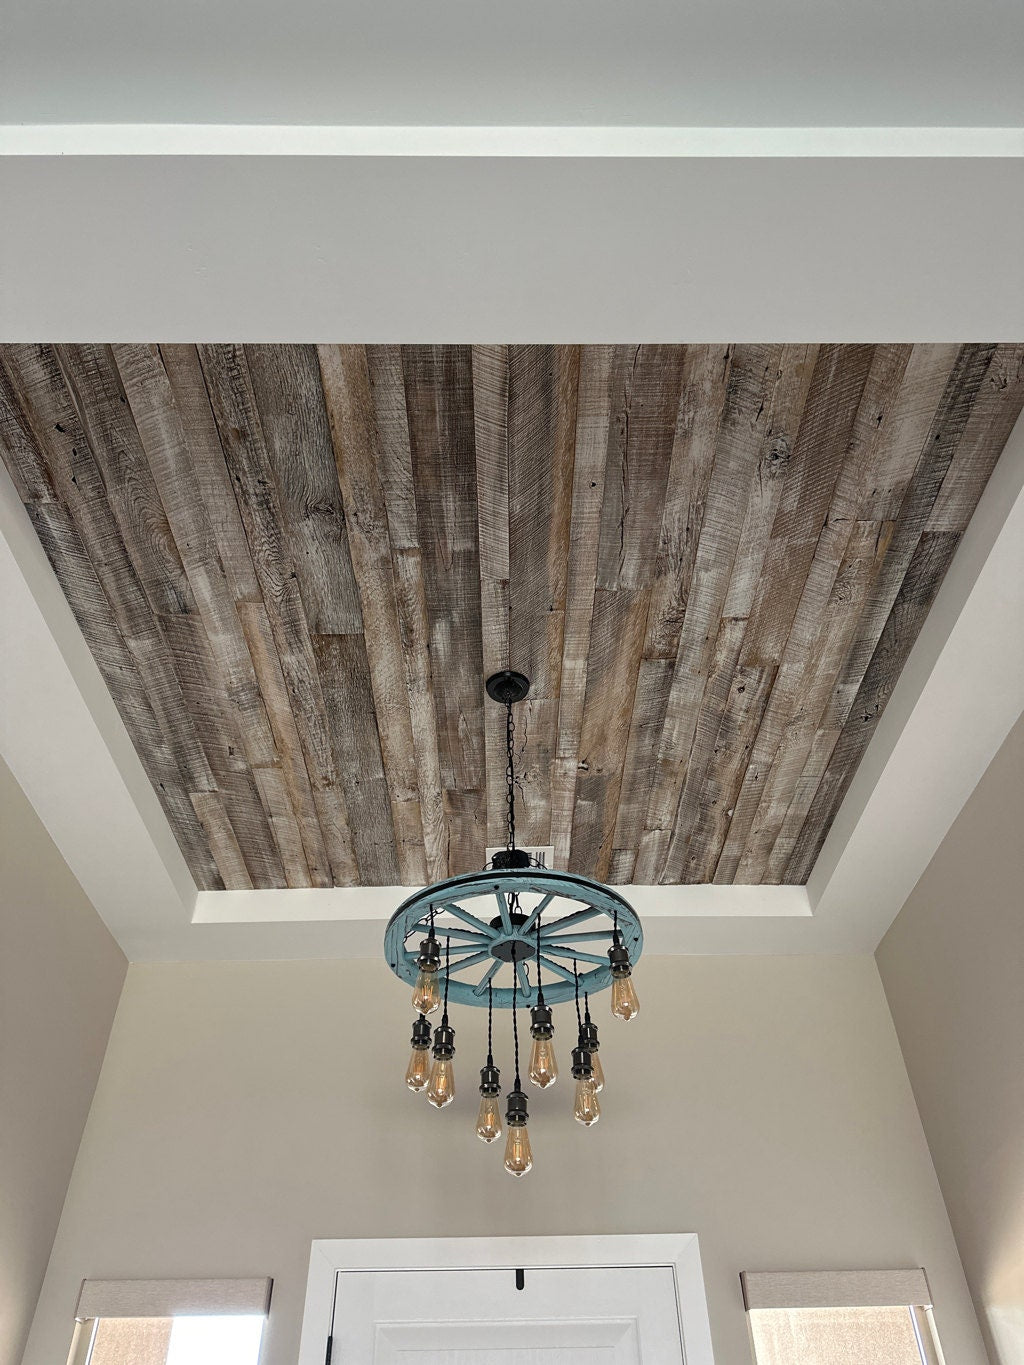 antique white reclaimed barnwood planks used on the ceiling of a foyer. Wood is brown with a white wash finish applied. A rustic wheel chandelier hangs from the middle with Edison bulbs hanging from the wheel.